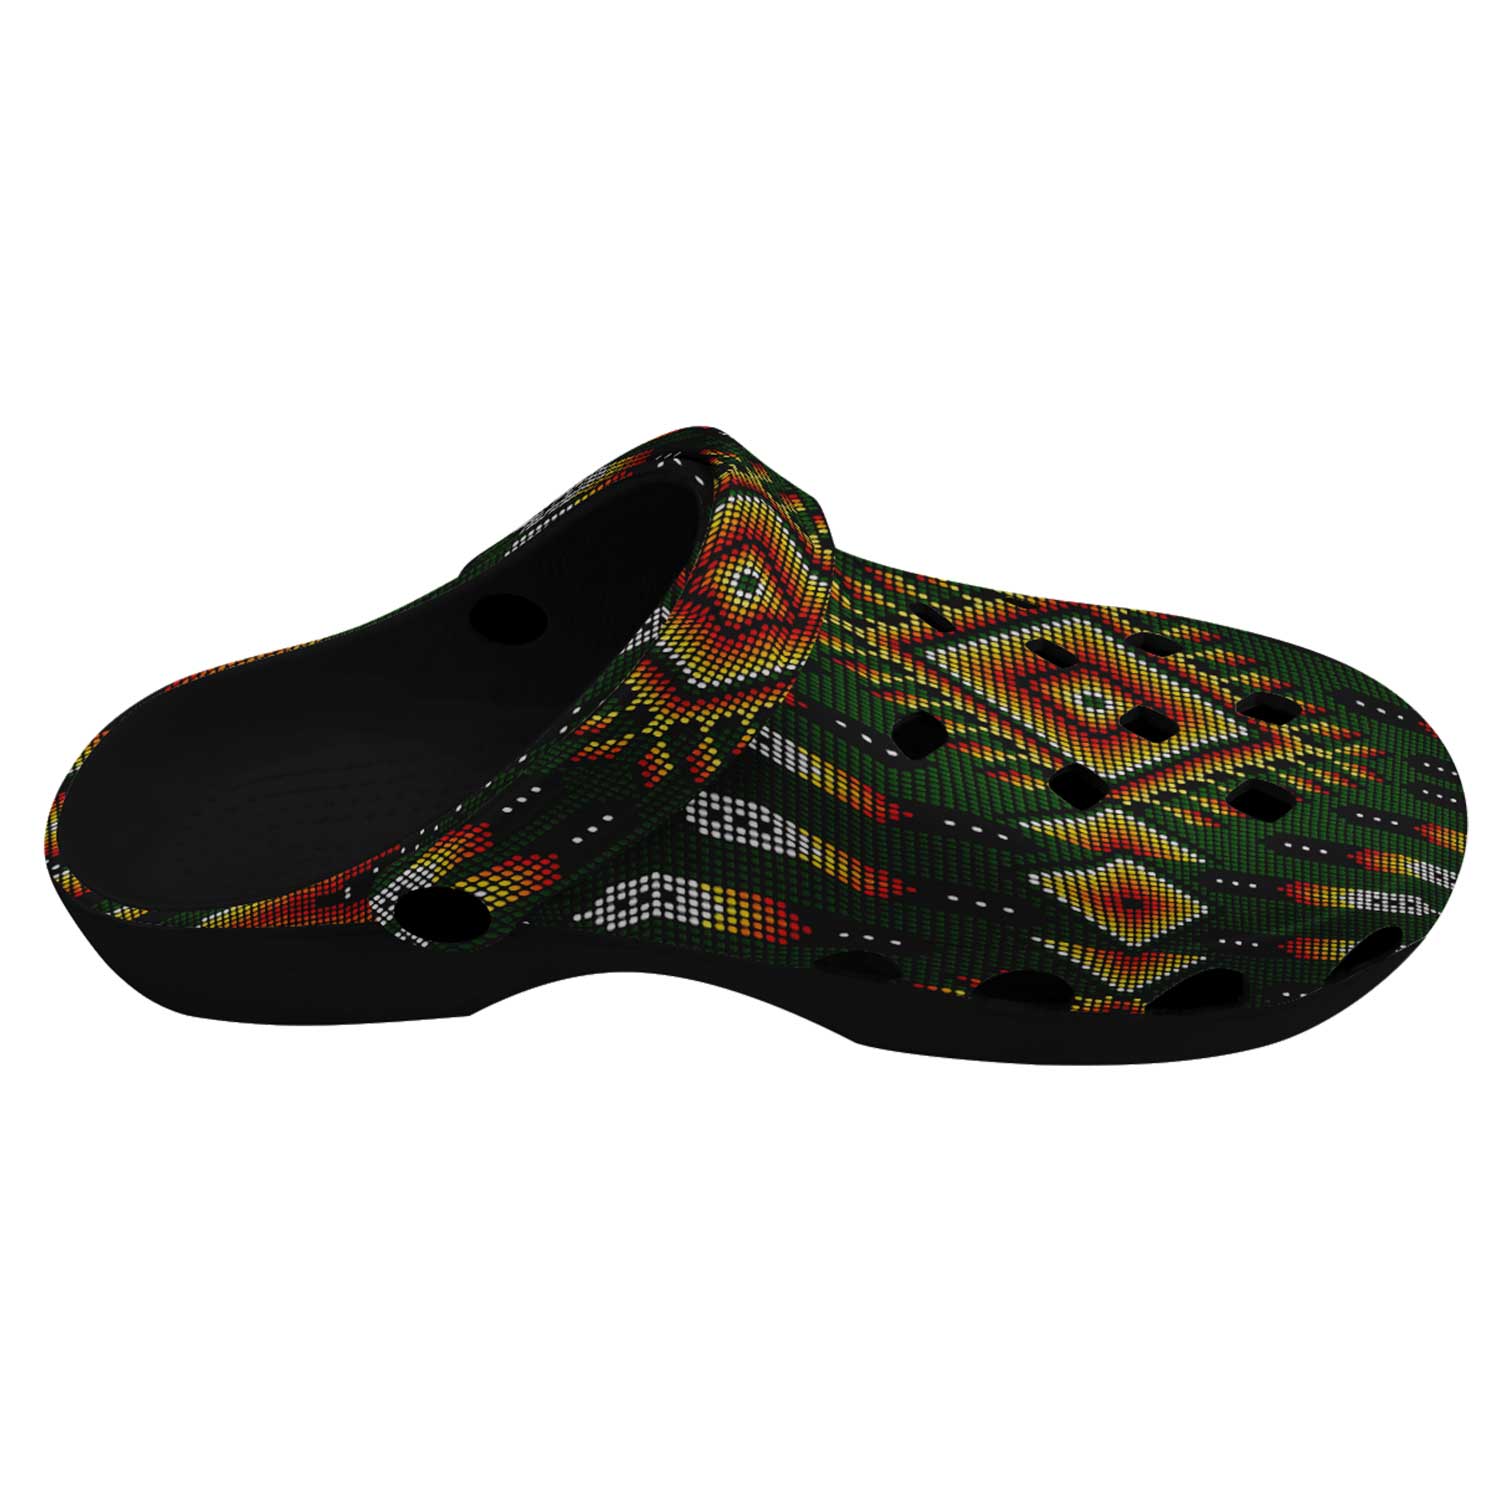 Fire Feather Green Muddies Unisex Clog Shoes